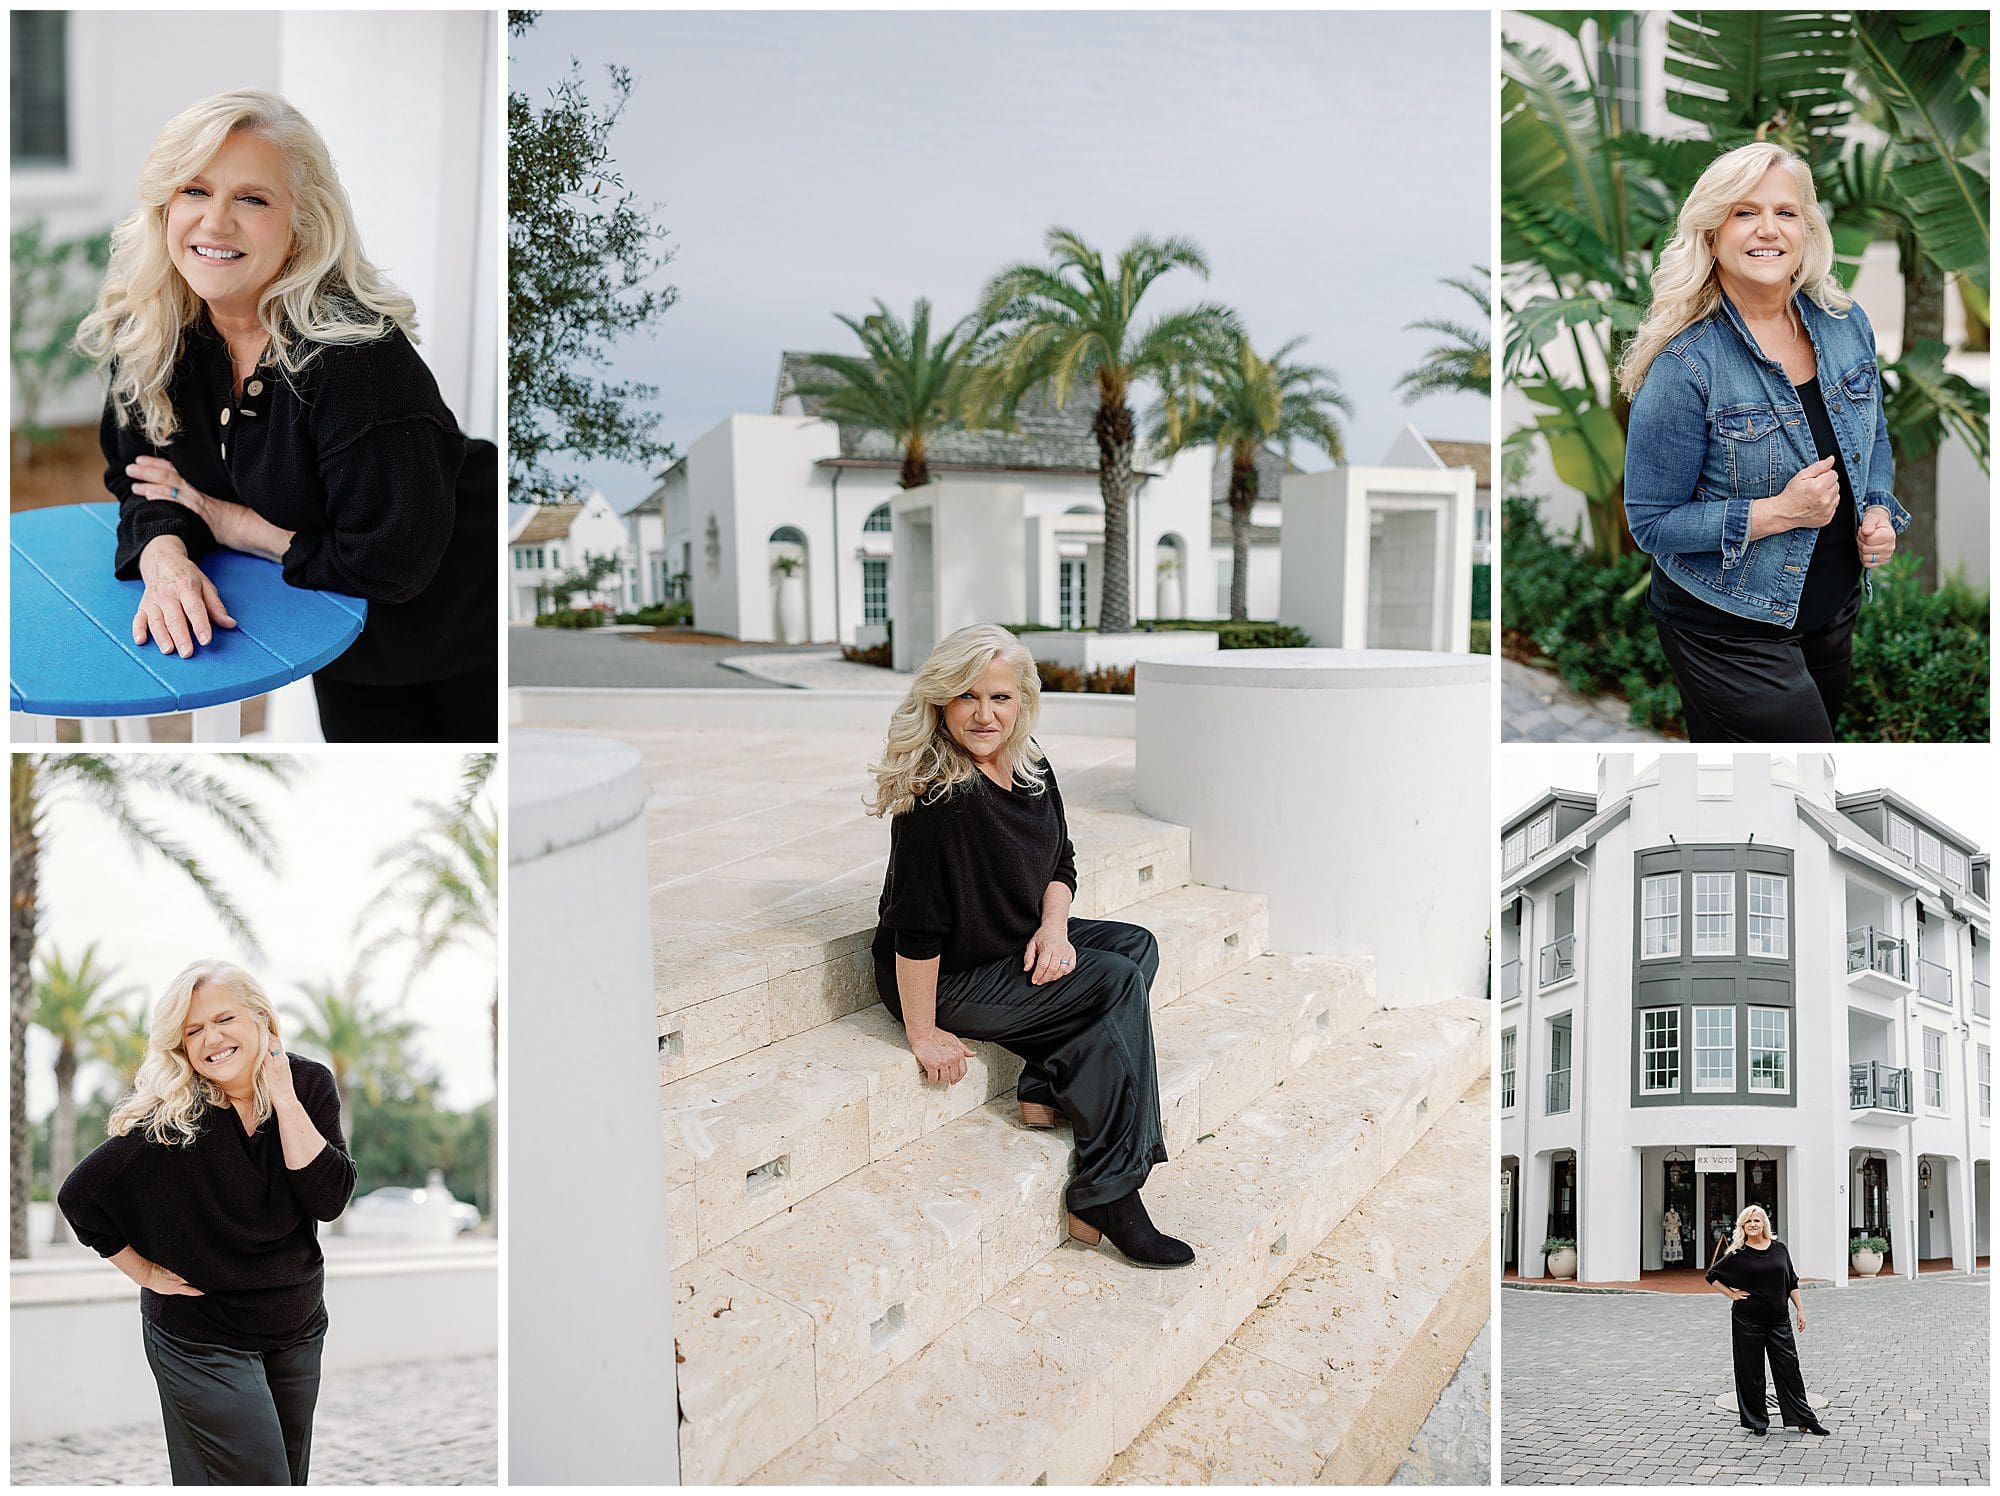 Portraits of a woman sitting on steps in front of a building.